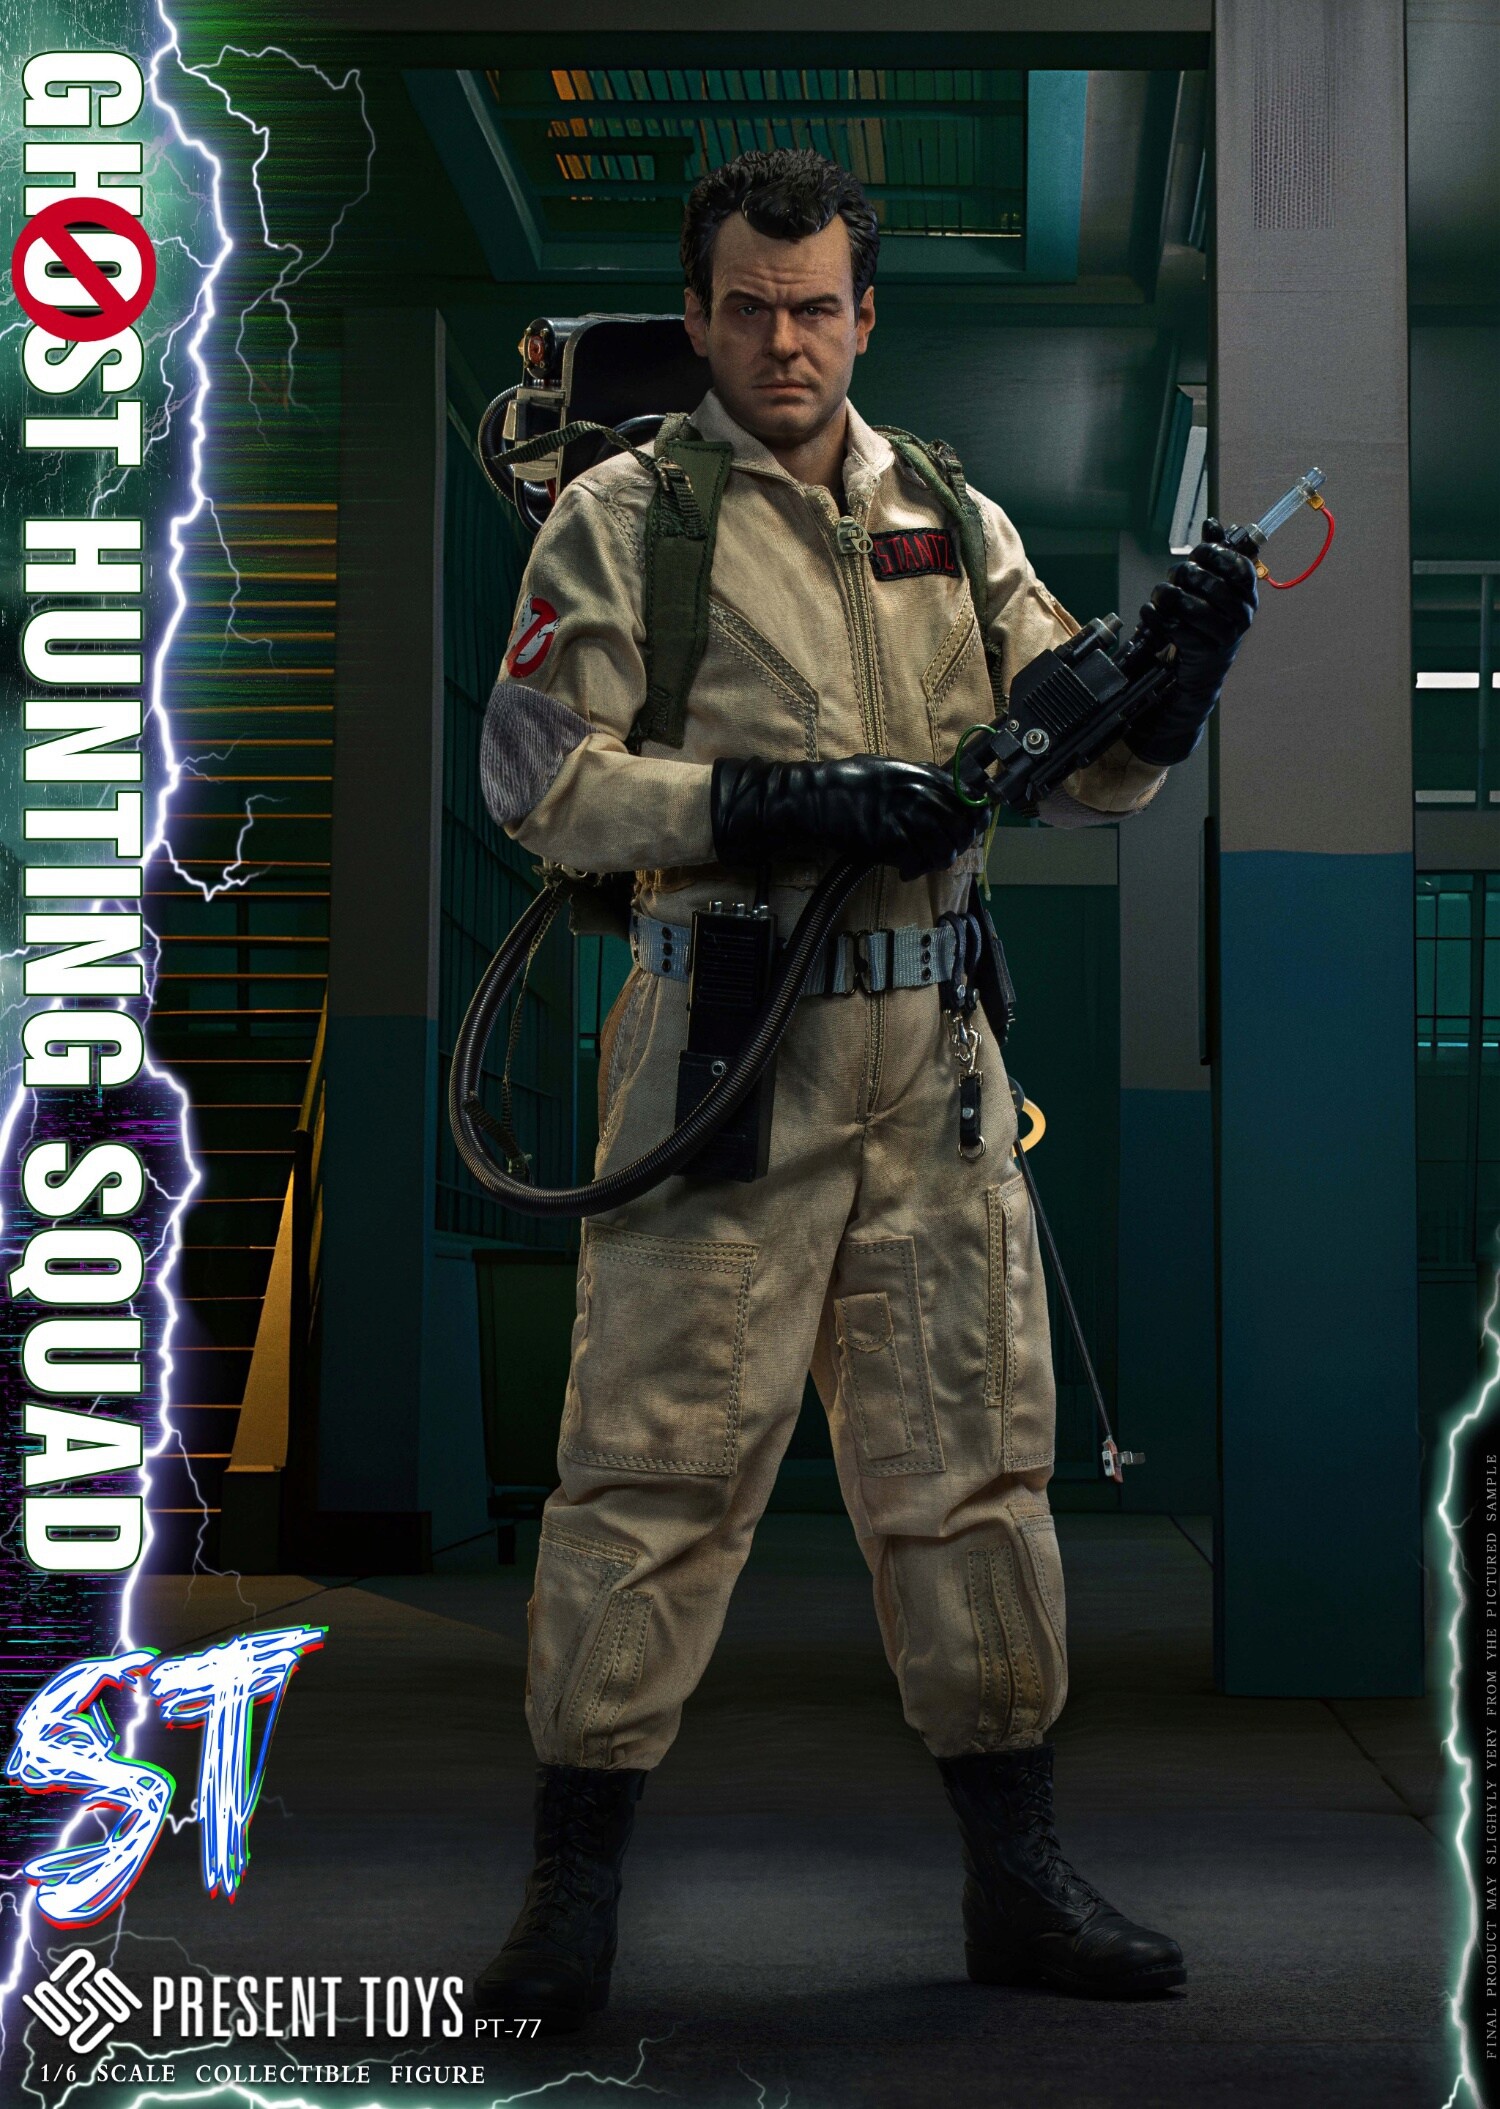 NEW PRODUCT: PRESENT TOYS - Ghostbusters-ST Agent & SP Agent Collection #PT-sp77/PT-sp78 02184